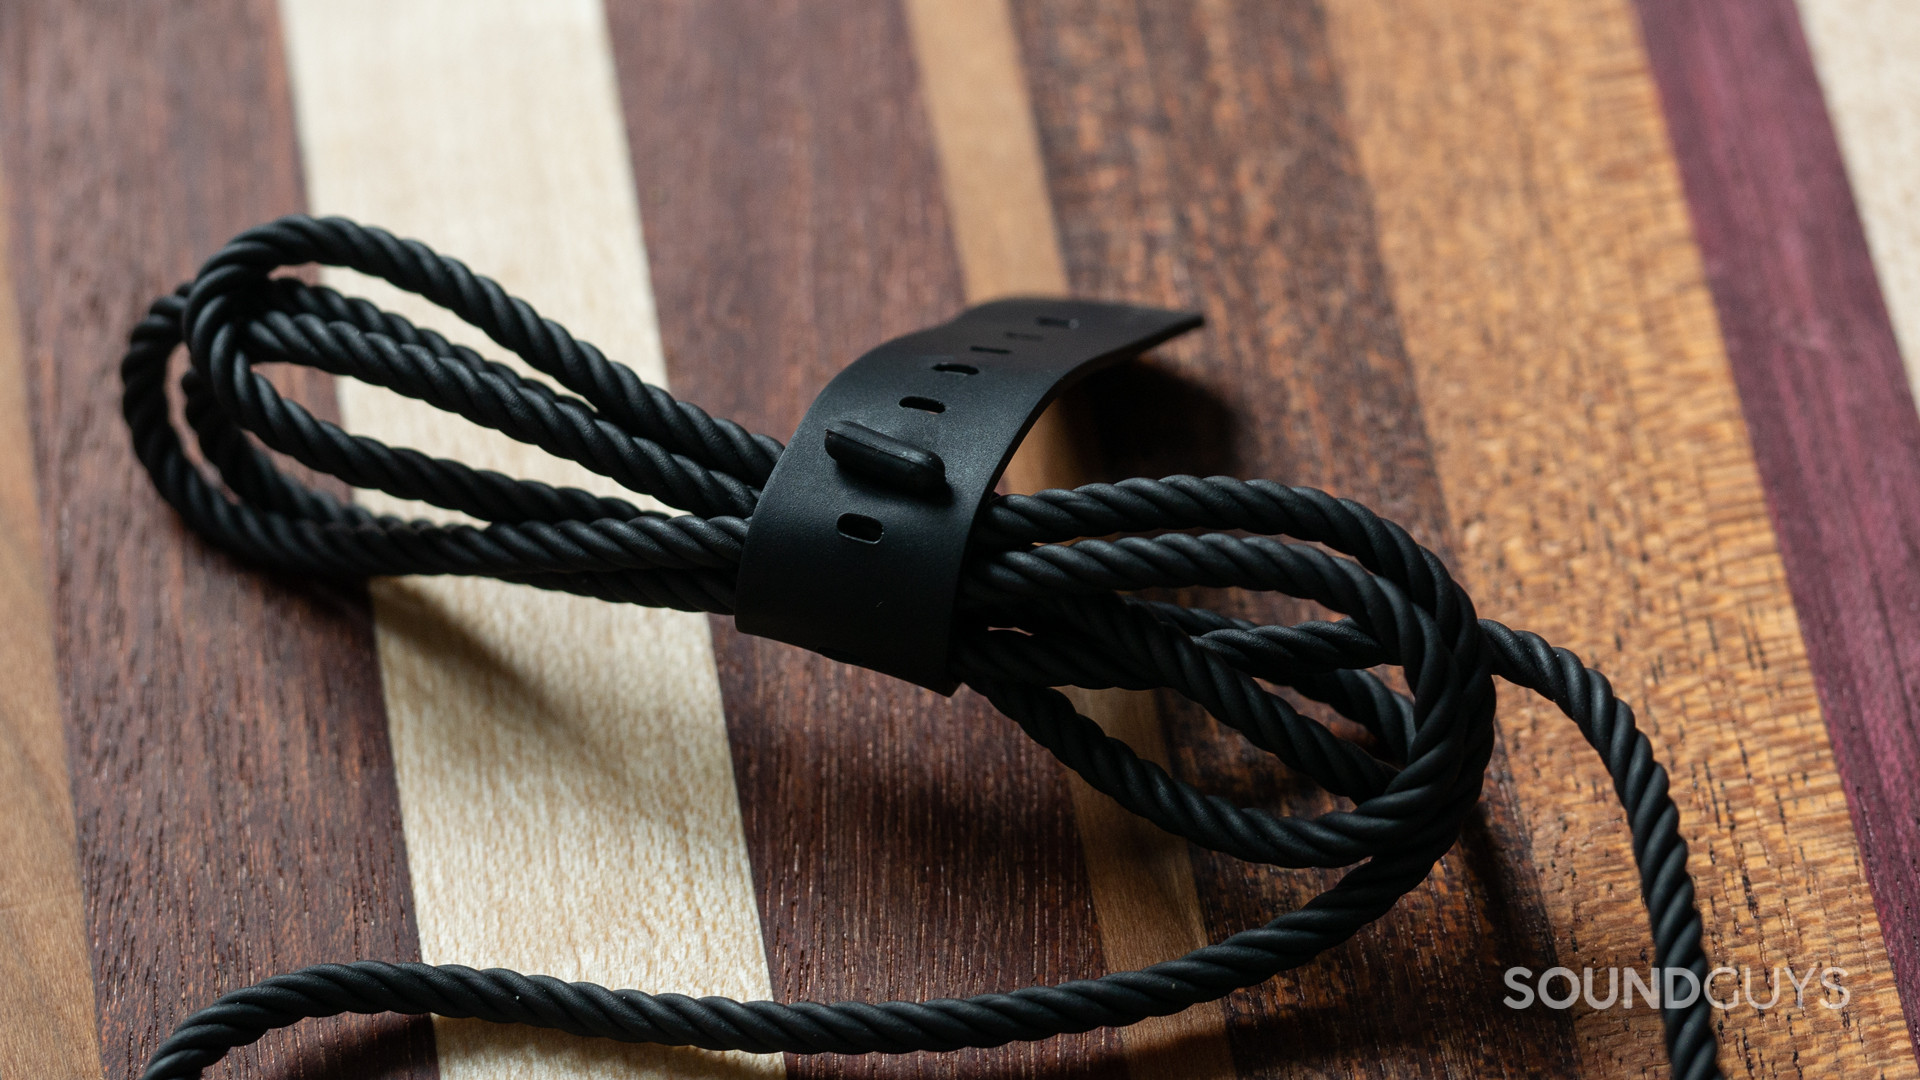 The Razer Moray's braided cable, with a cable tie.